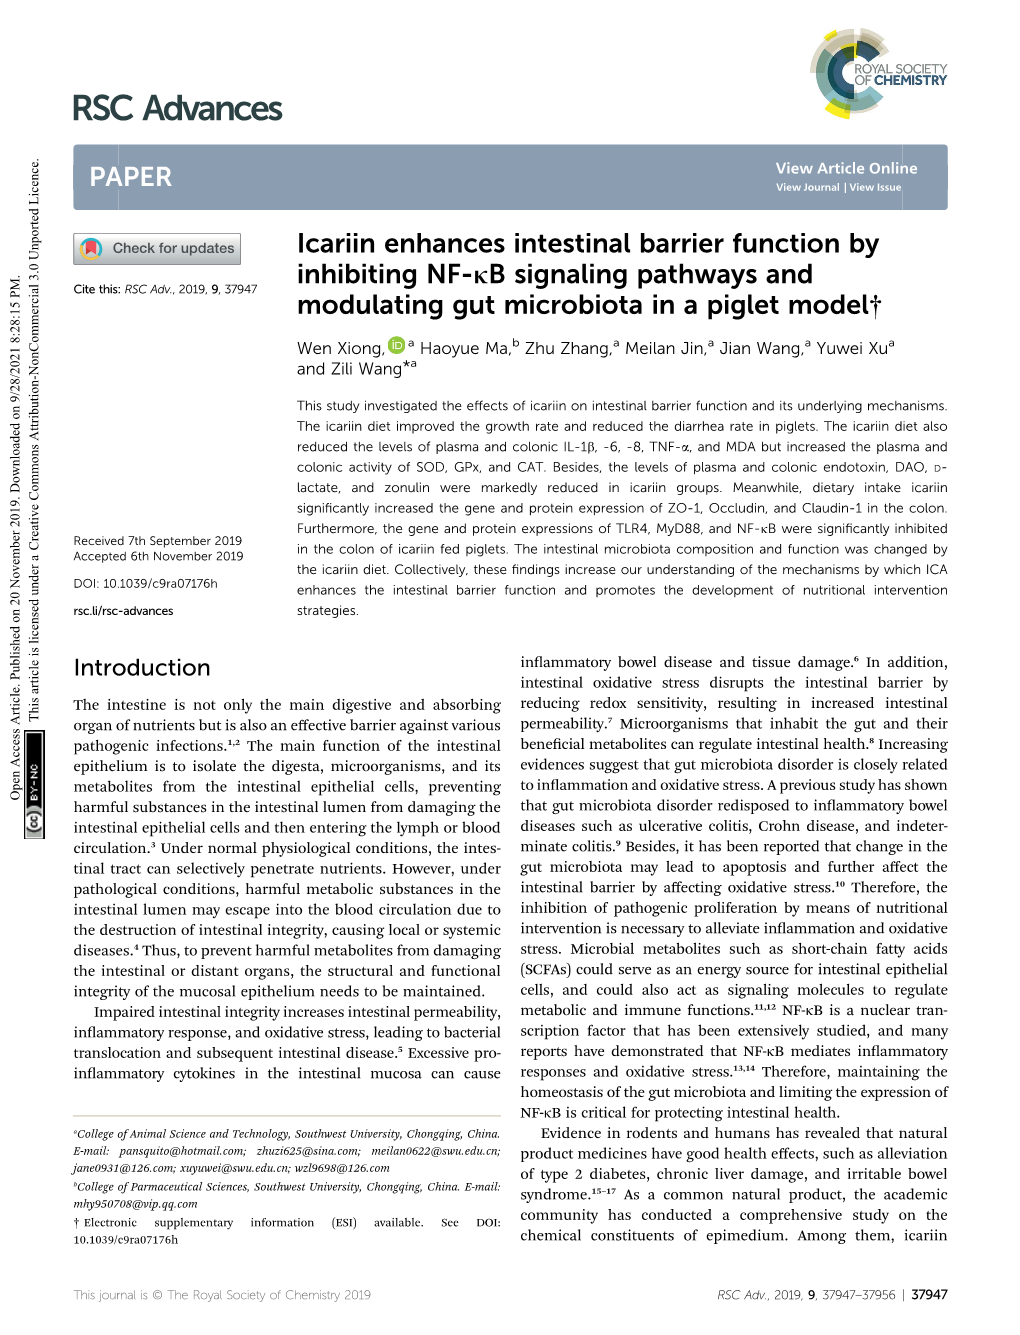 Icariin Enhances Intestinal Barrier Function by Inhibiting NF-Κb